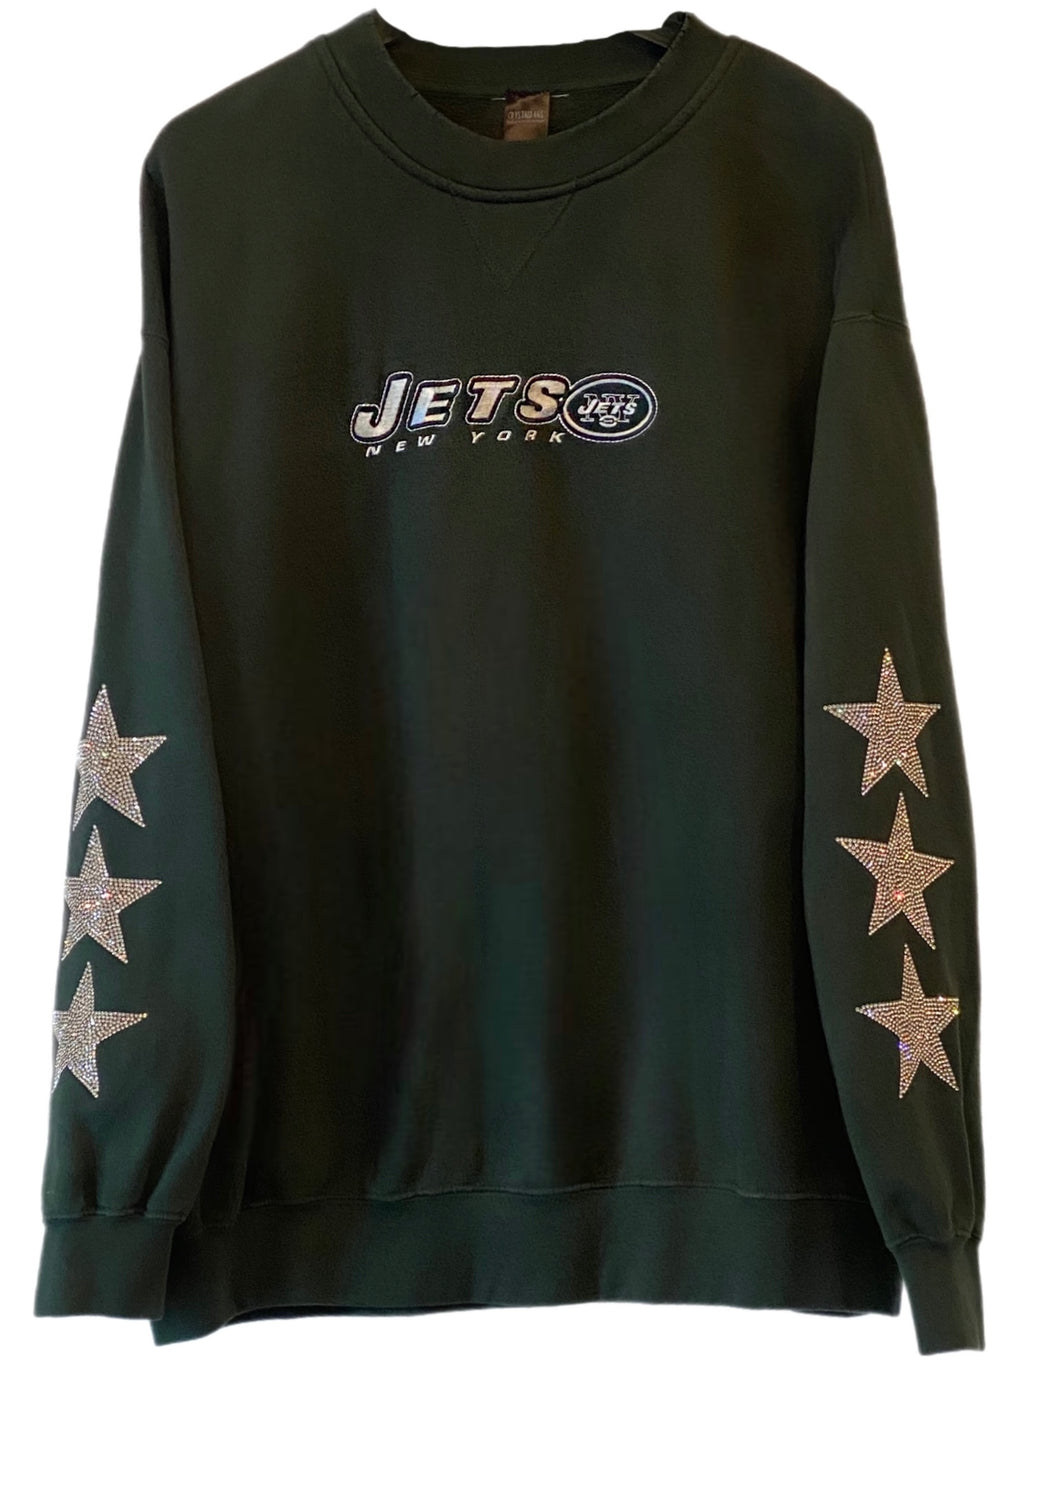 NY Jets, NFL One of a KIND Vintage Sweatshirt with Three Crystal Star Design